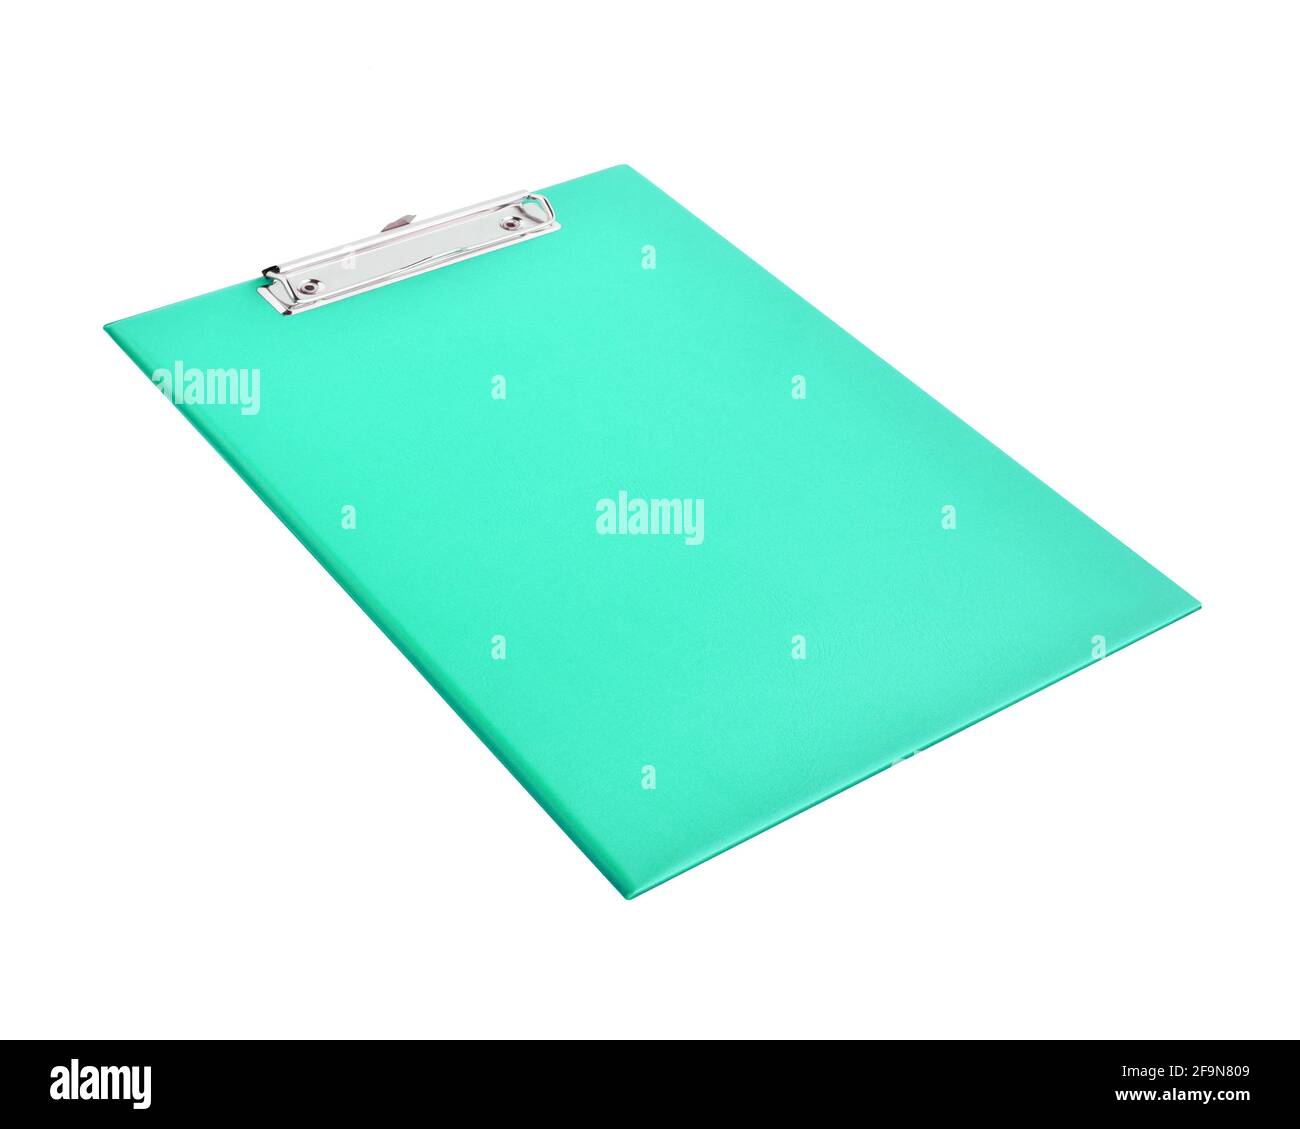 Clipboard - colorful plastic clipboard or writing board isolated on white background Stock Photo